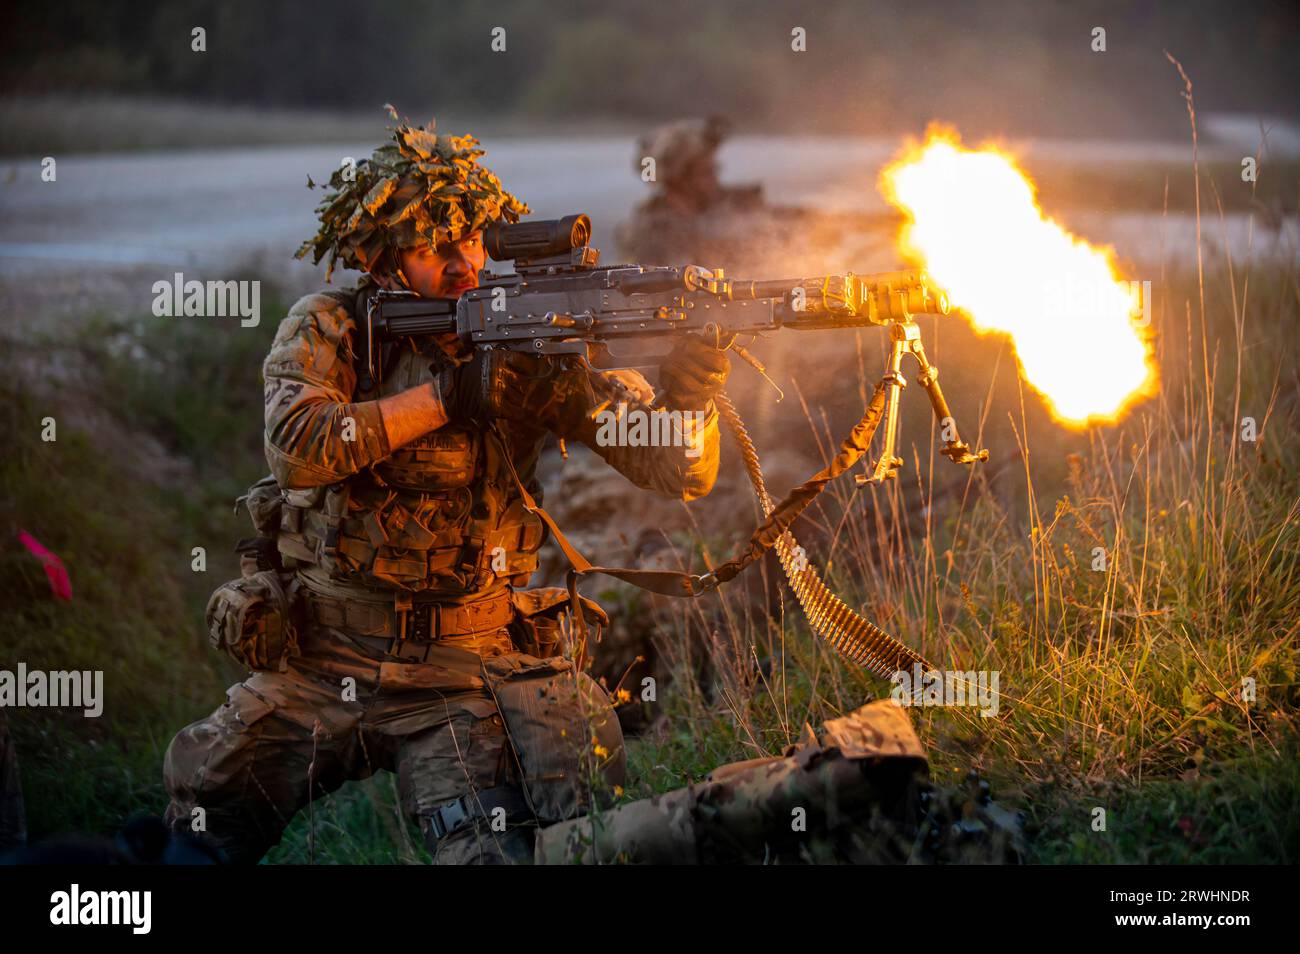 Hohenfels, Germany. 15 September, 2023. A U.S. Army soldiers with the 2nd Cavalry Regiment fires a M240 light machine gun during a gunfire battle with mock enemy forces during exercise Saber Junction 23 at the Joint Multinational Readiness Center, September 14, 2023 near Hohenfels, Germany. Credit: 1st Sgt. Michel Sauret/US Army Photo/Alamy Live News Stock Photo